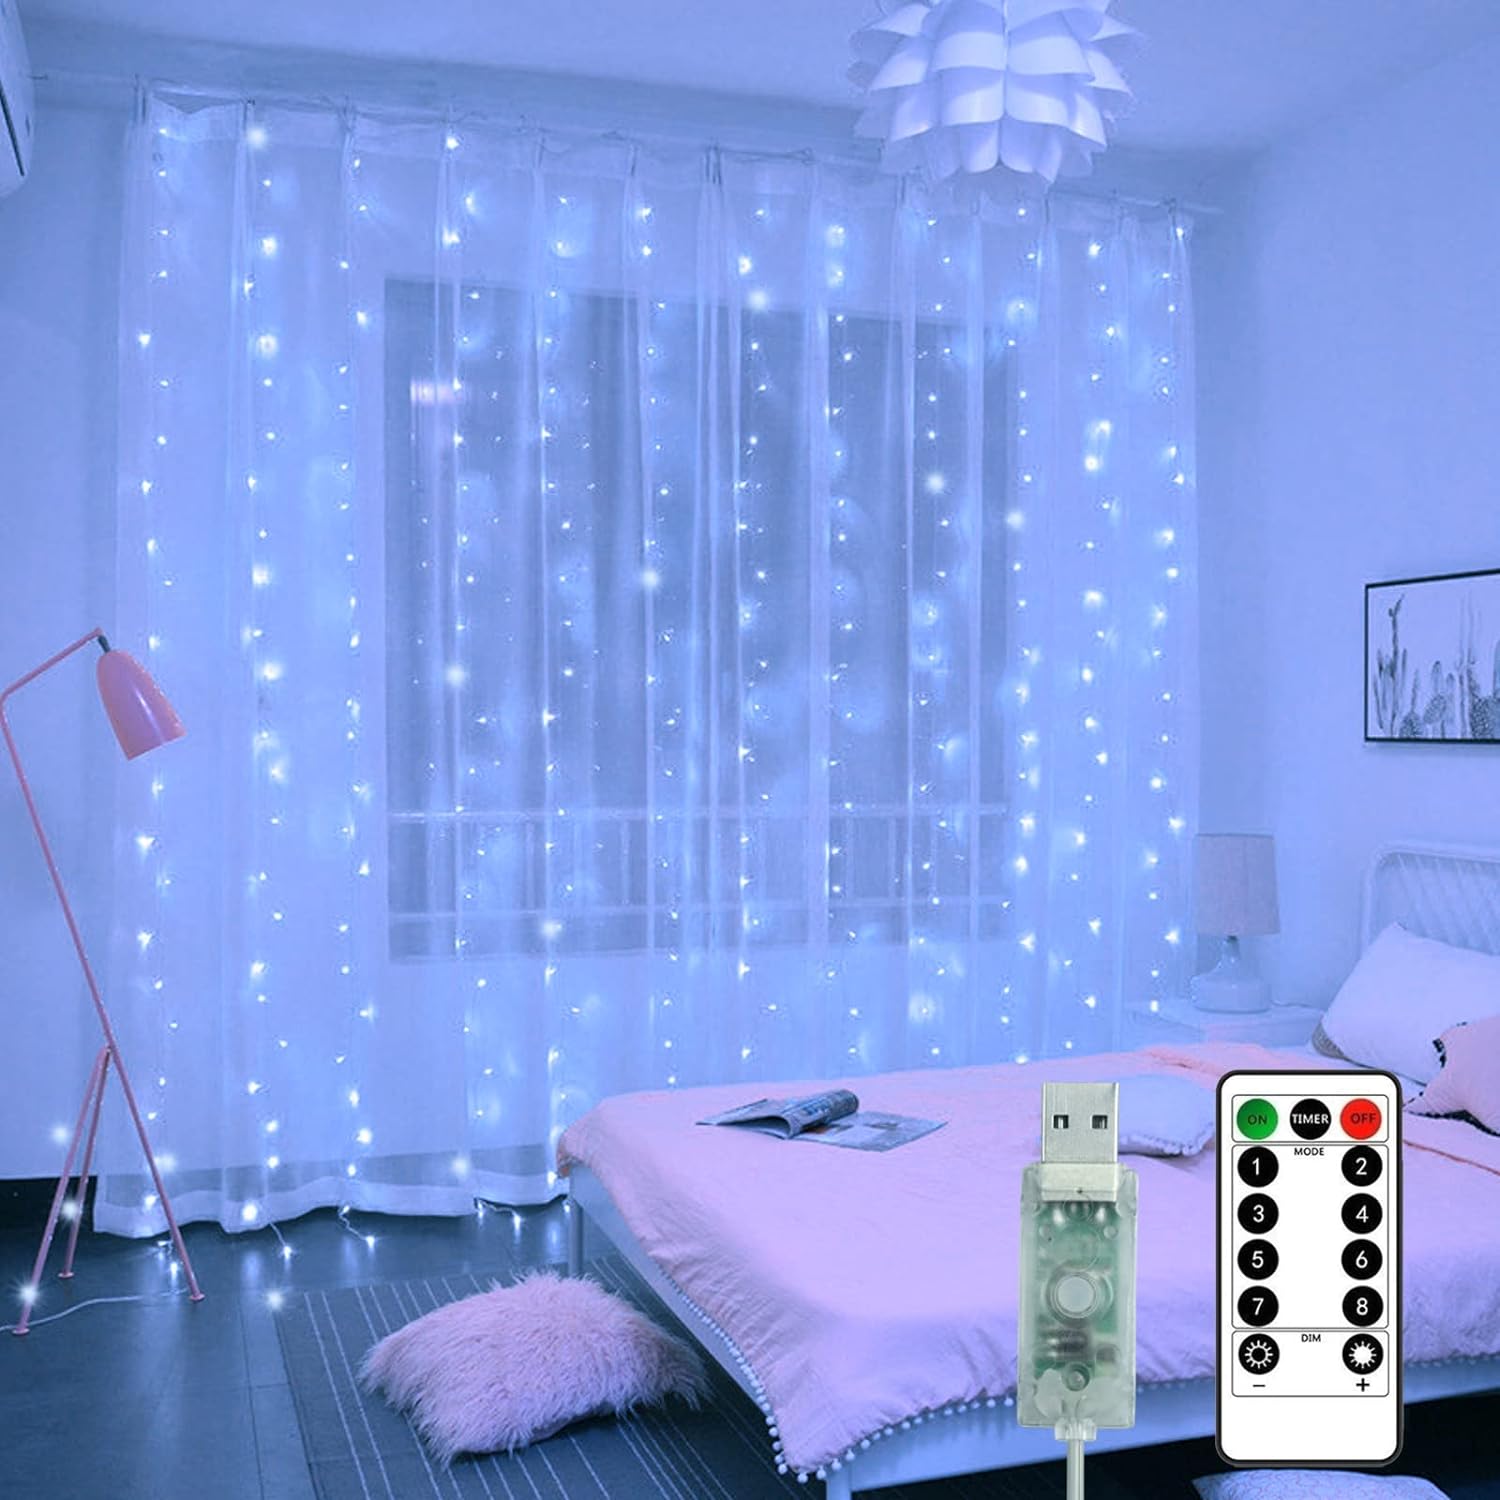 MDEDL Curtain Fairy Lights, 3mx3m 300 LED Christmas Window Lights for Bedroom with Remote, Timer, Adjustable Brightness, String Lights for Christmas, Garden, Party, Wedding Decorations (White)